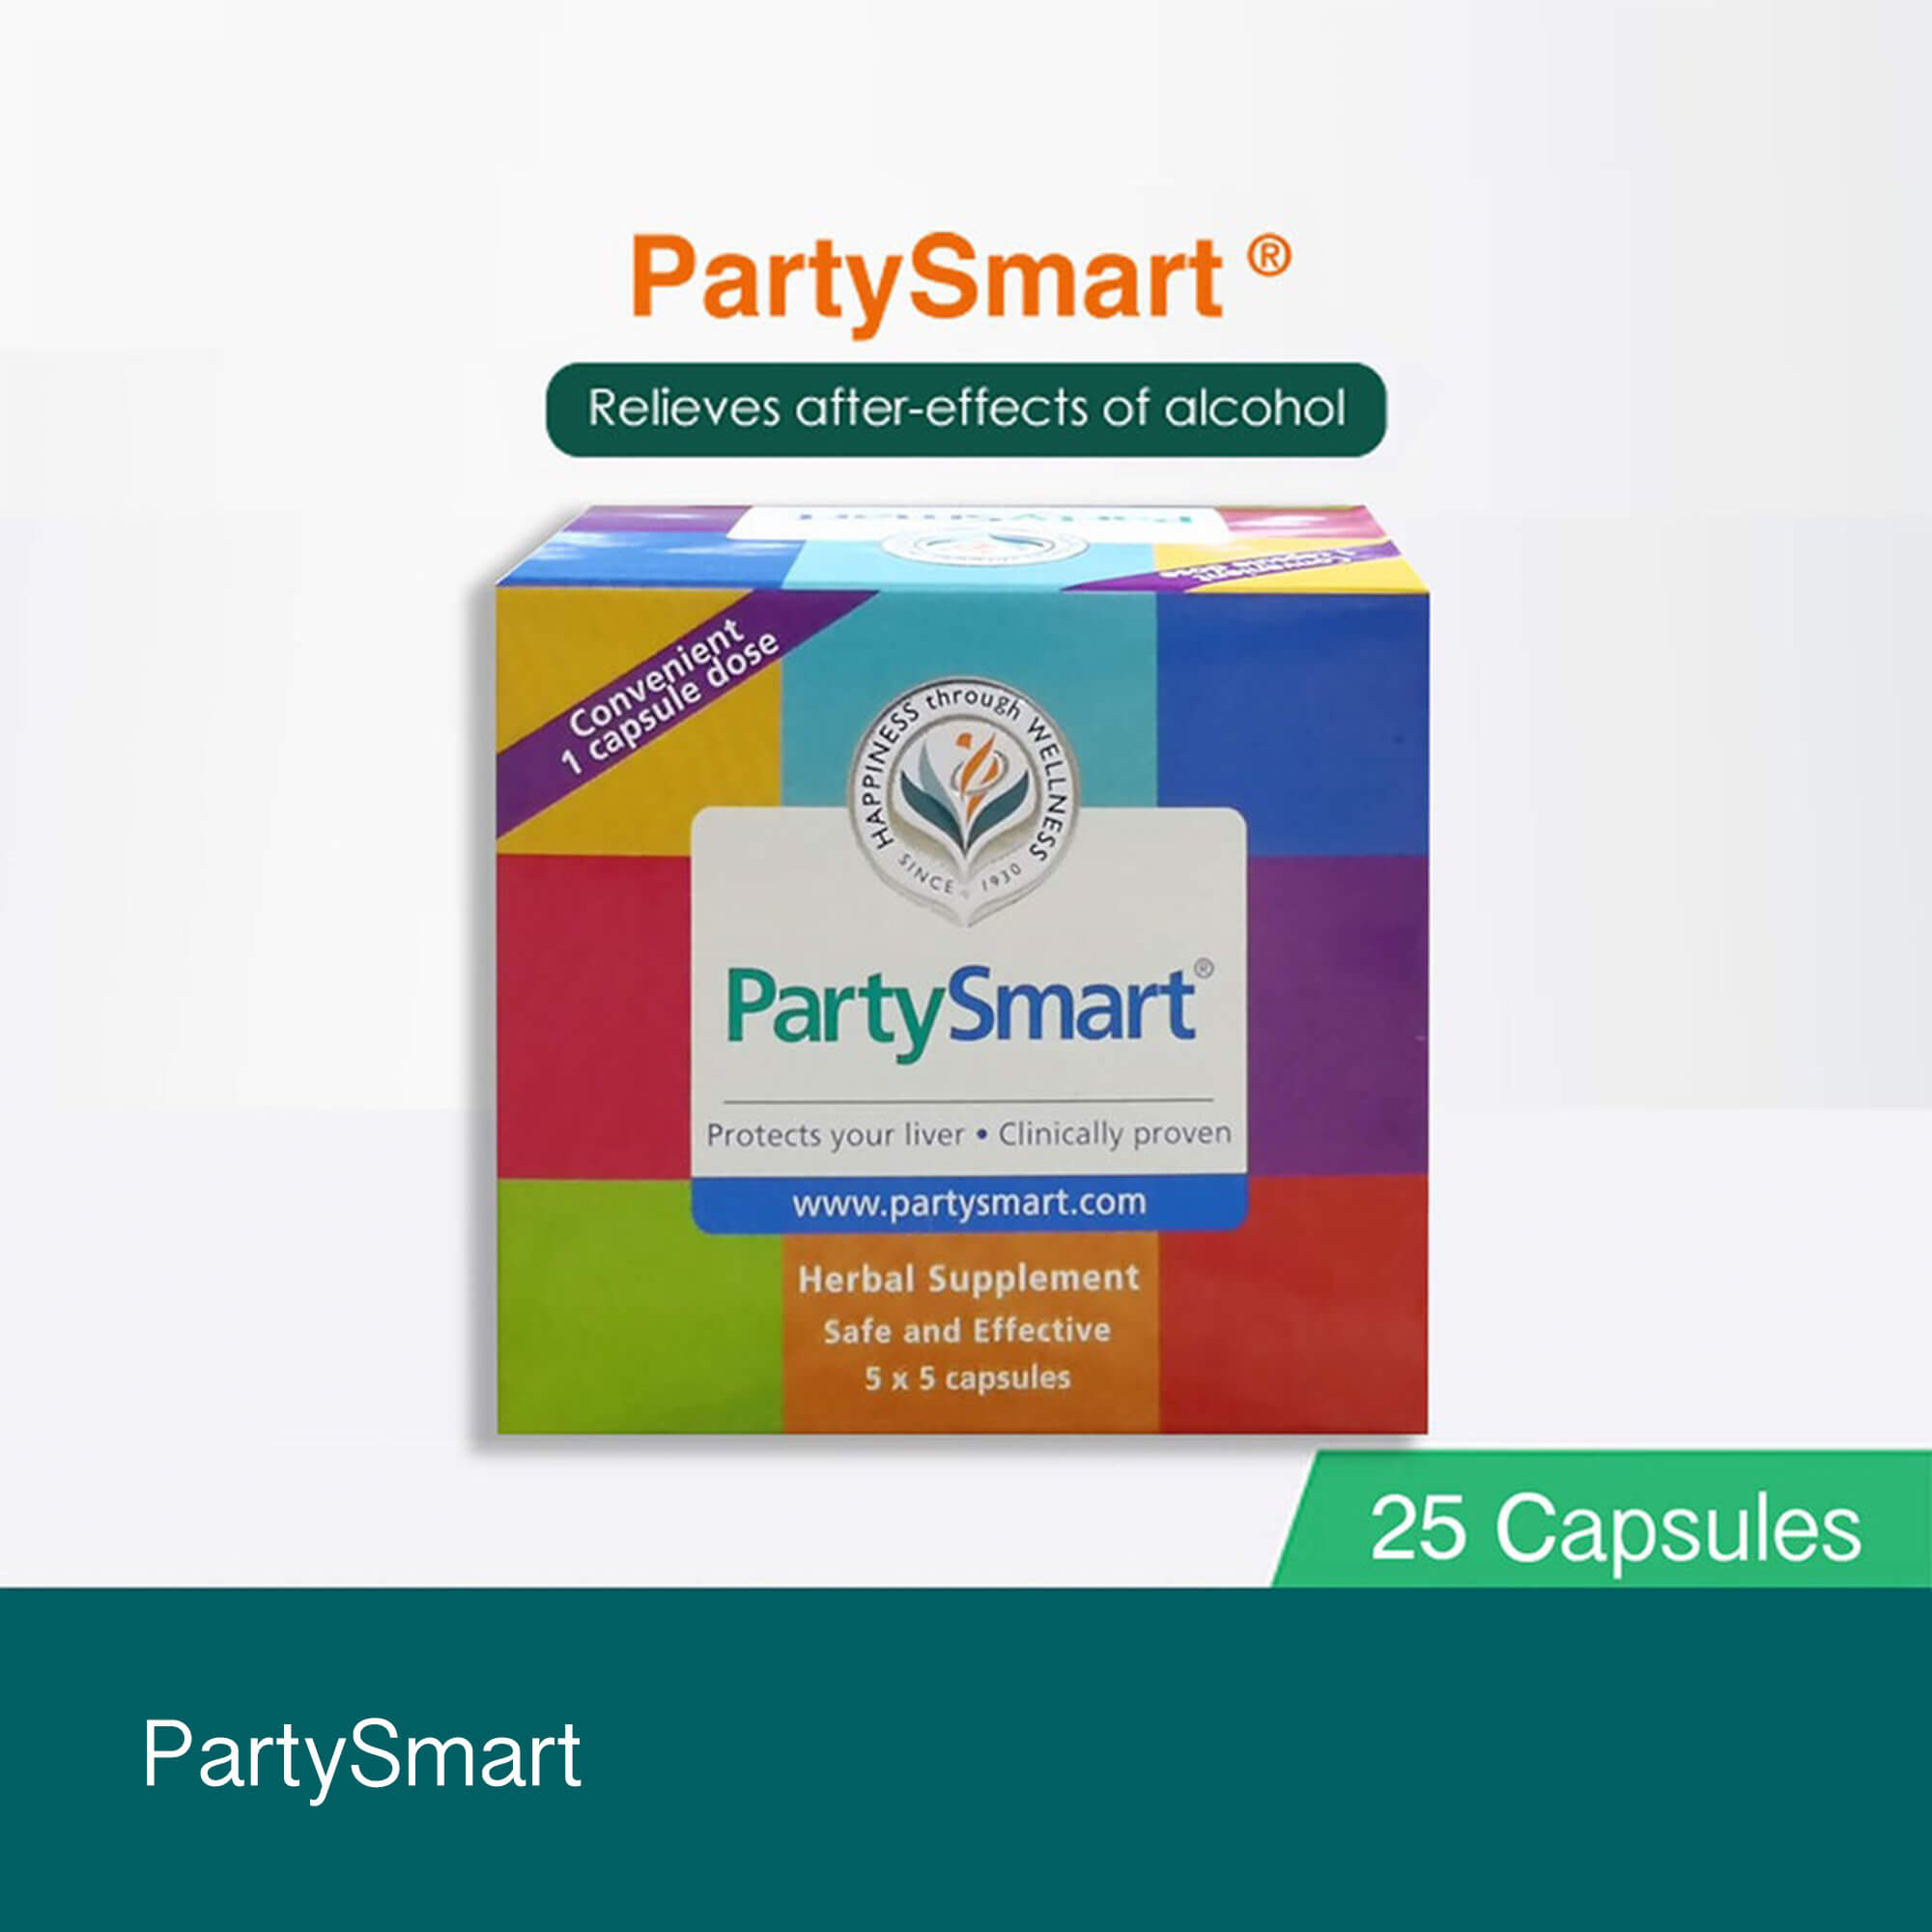 Himalaya Party Smart Capsules Review